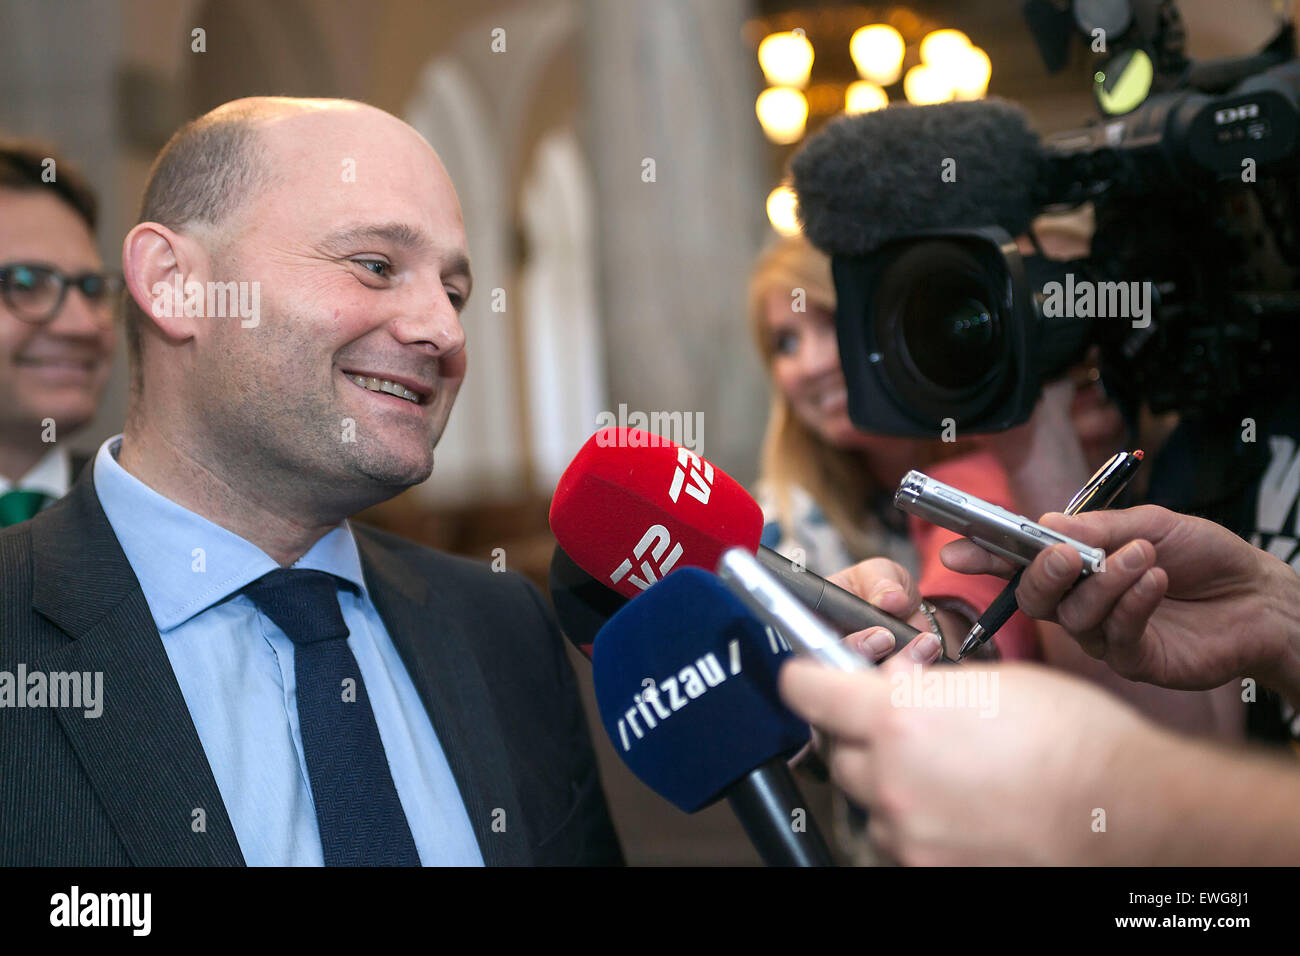 Copenhagen, Denmark, June 22nd, 2015: Danish Soeren Pape Poulsen, chairman forThe Consevative, speaks to the press before he meets Lars Loekke Rasmussen, where they will exchange views about a possible minority government let by Mr. Rasmussen and his party, Venstre (The Liberal's) Stock Photo